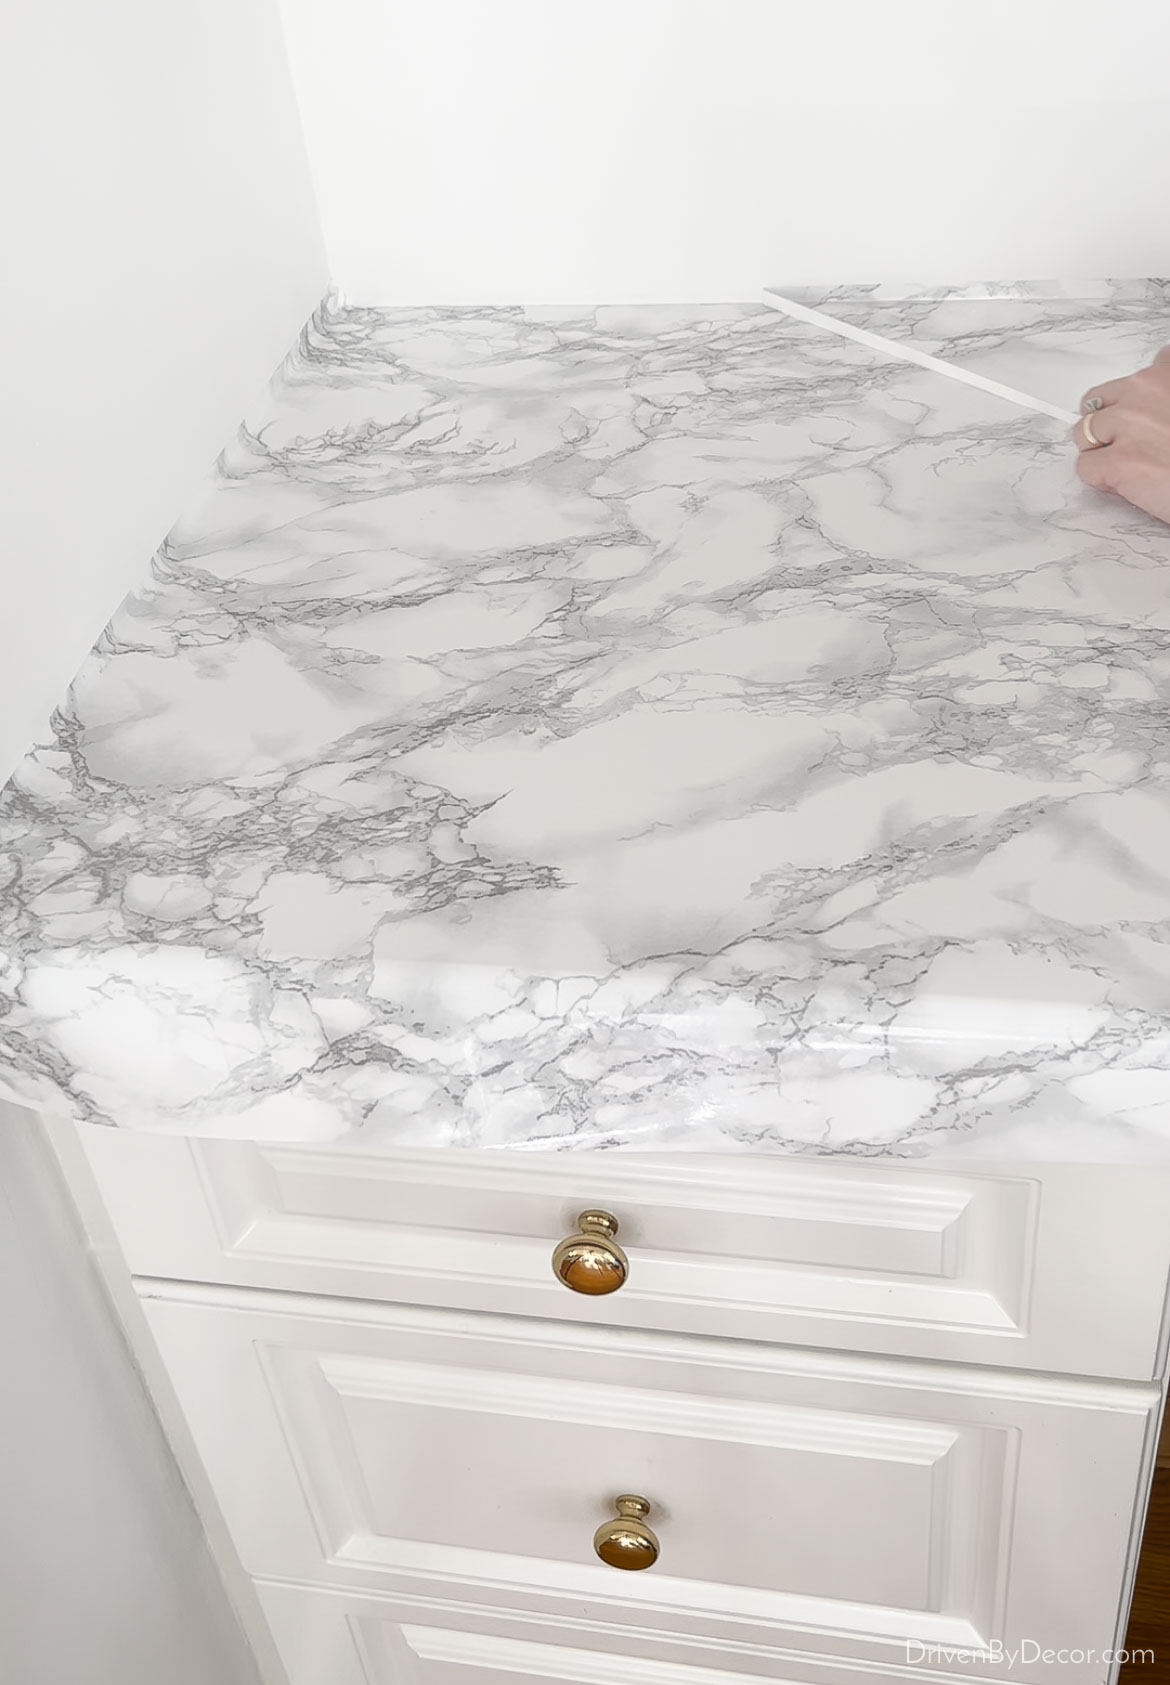 Removing the extra marble contact paper from the countertop edge